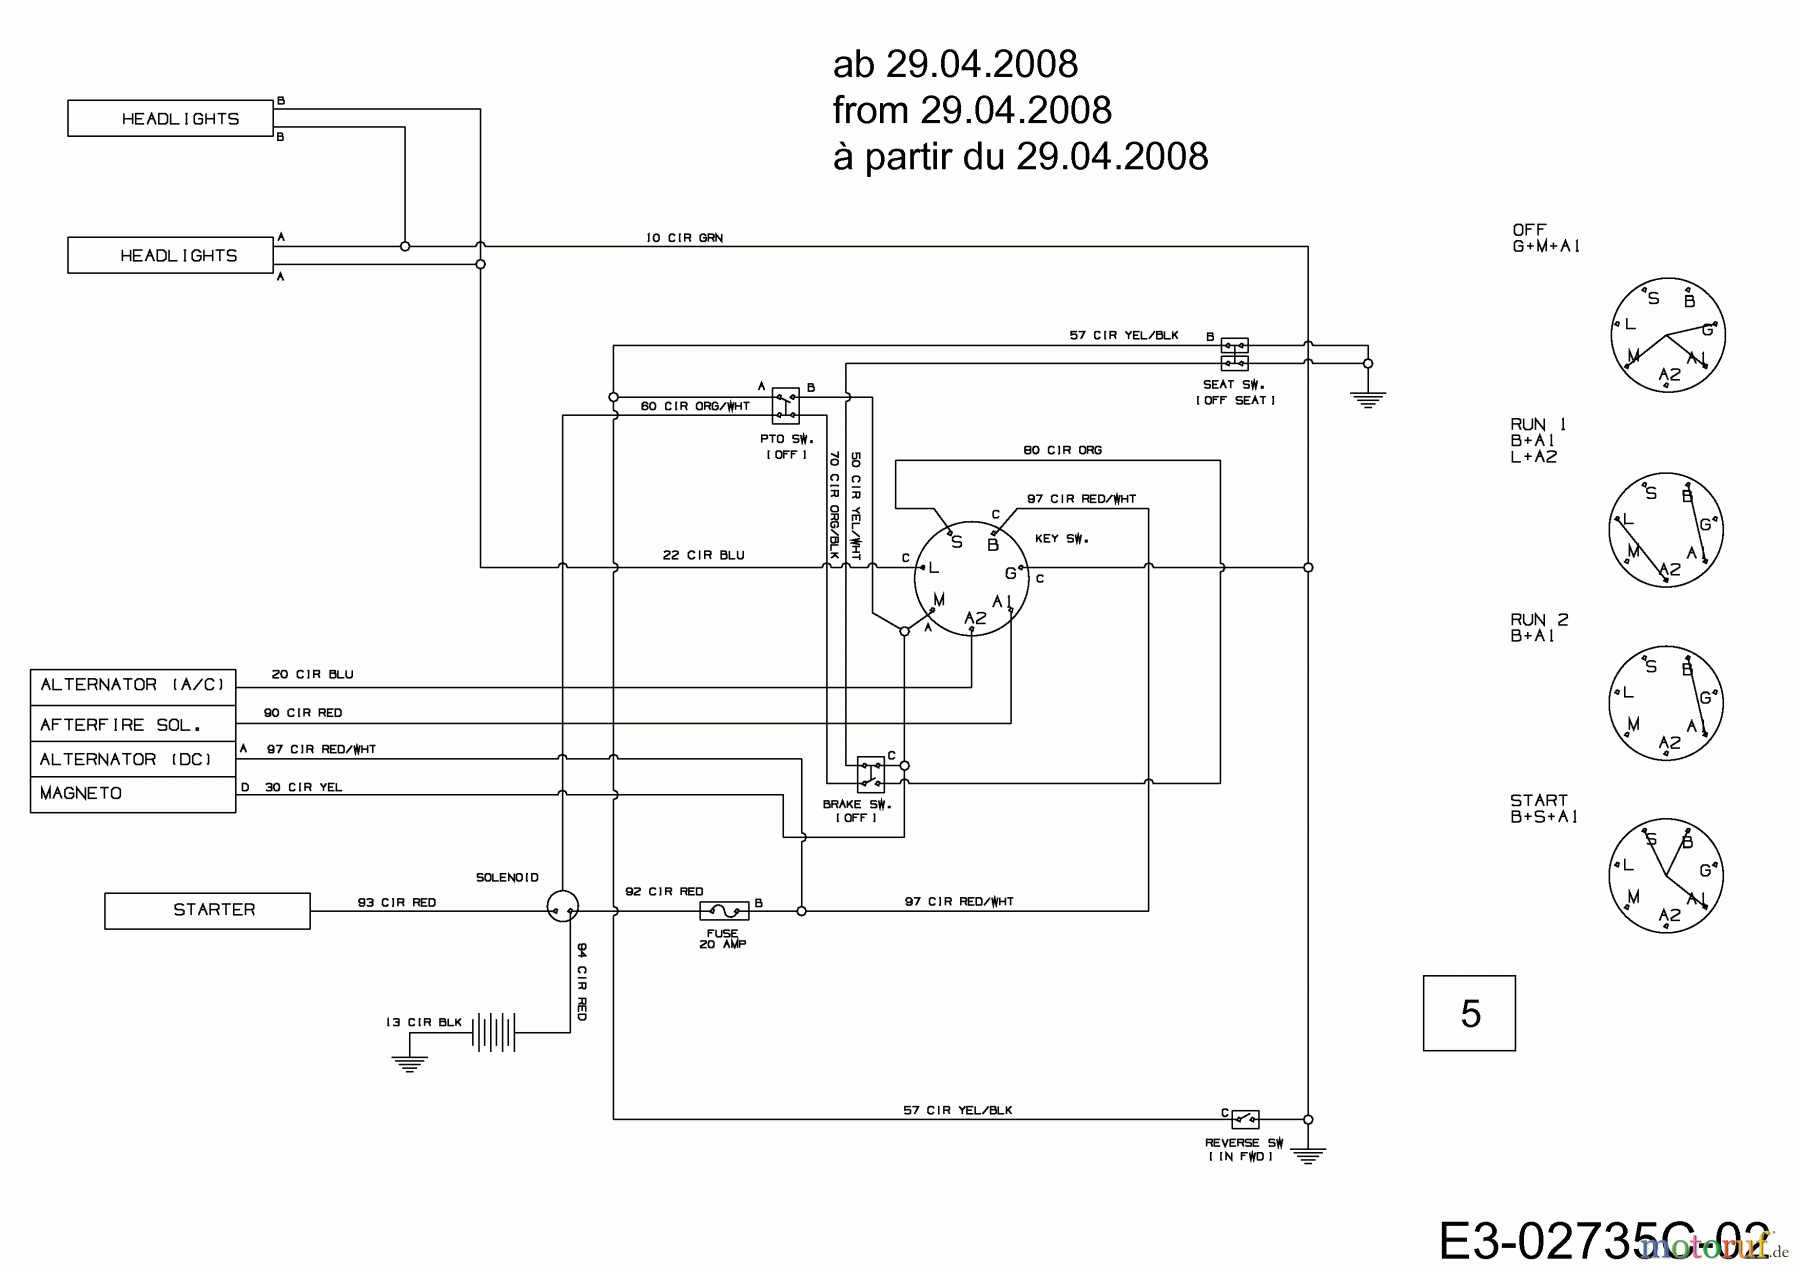  MTD Lawn tractors LH 175 13AN793G676  (2008) Wiring diagram from 29.04.2008